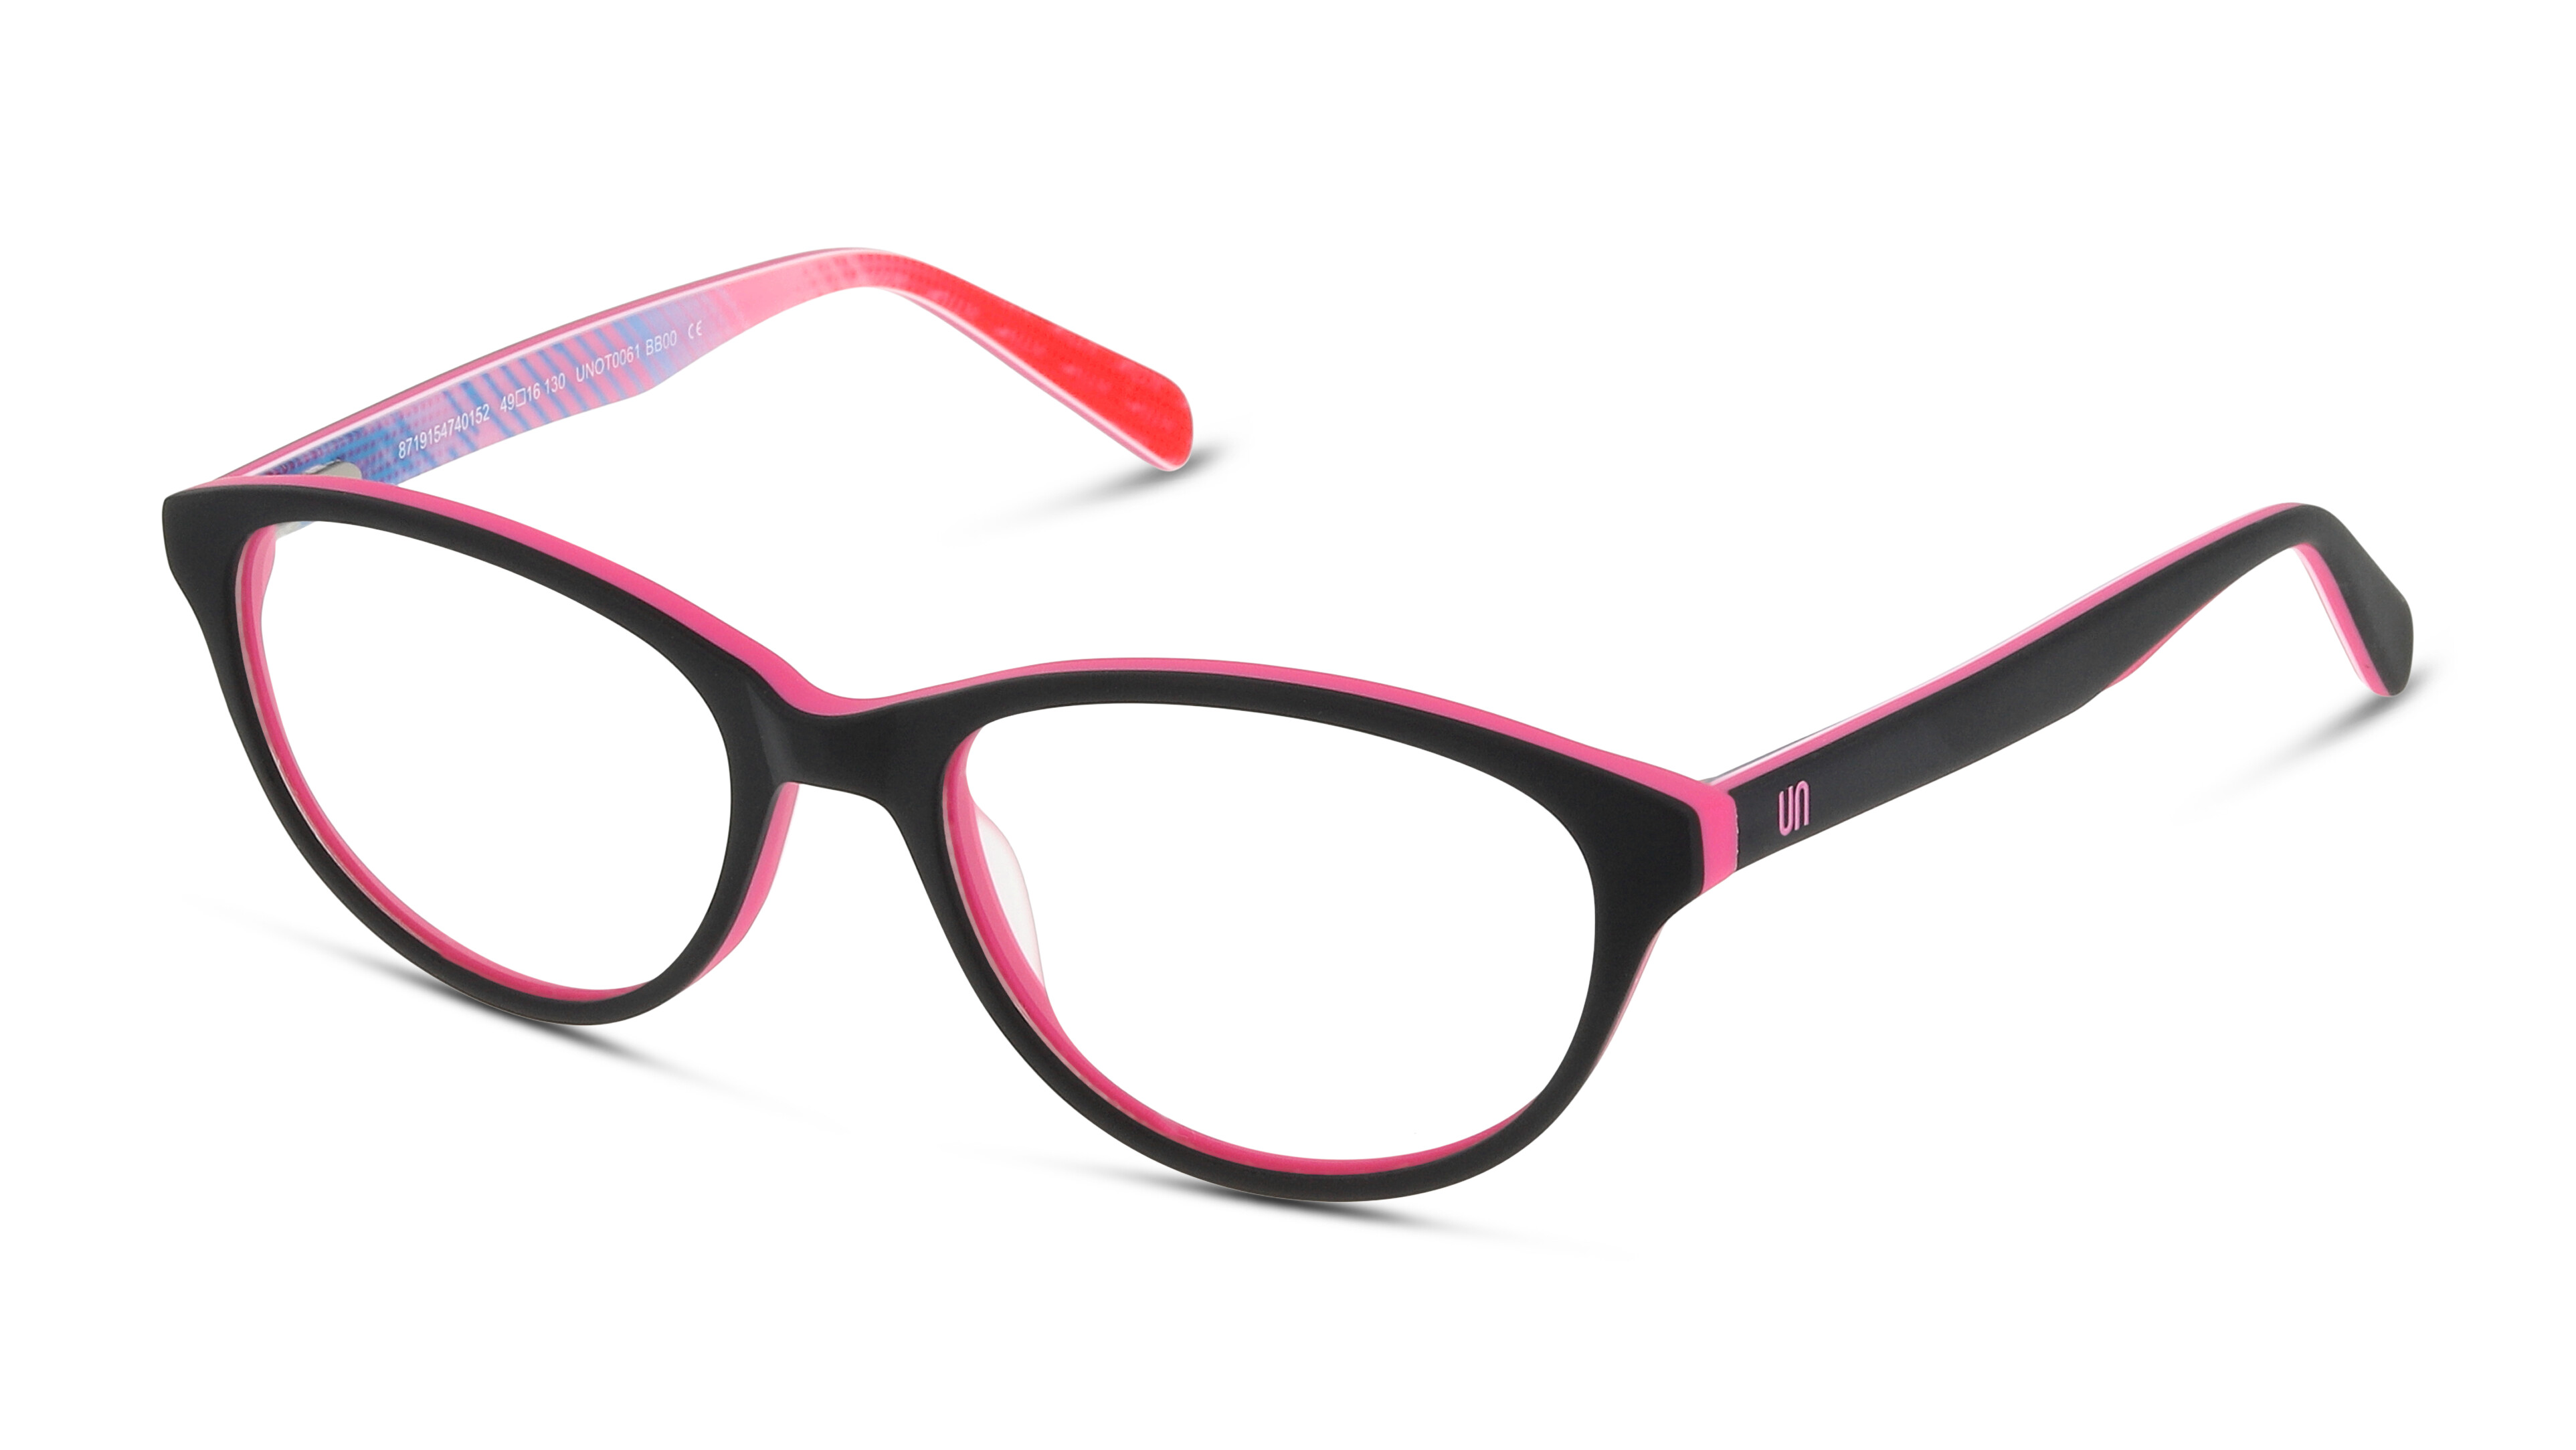 Angle_Left01 UNOFFICIAL UNOT0061 BB00 Brille Schwarz, Rosa